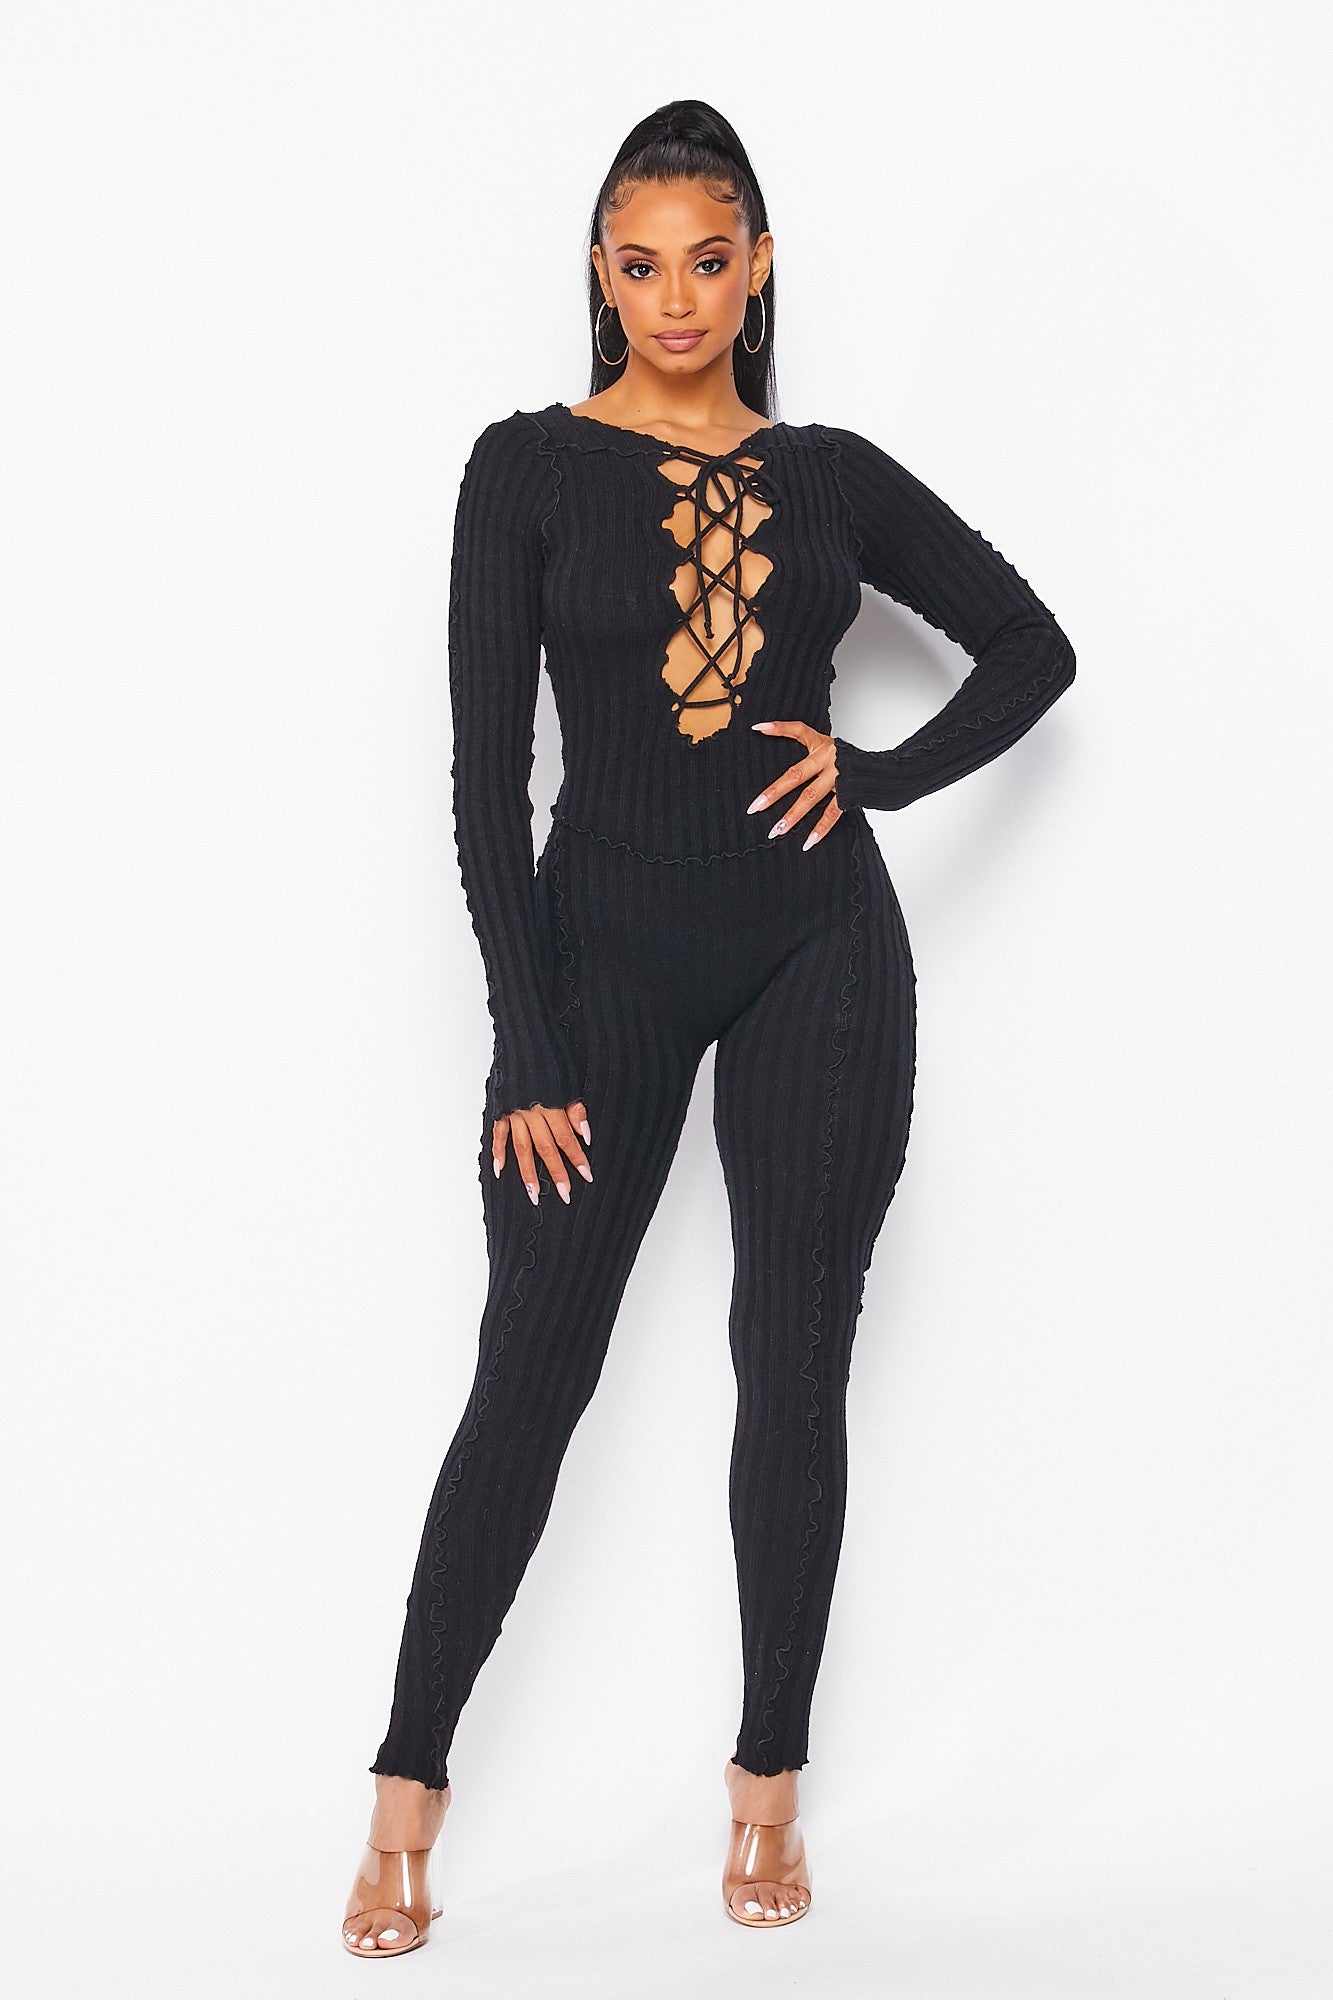 Putting it Sweetly Knit Jumpsuit